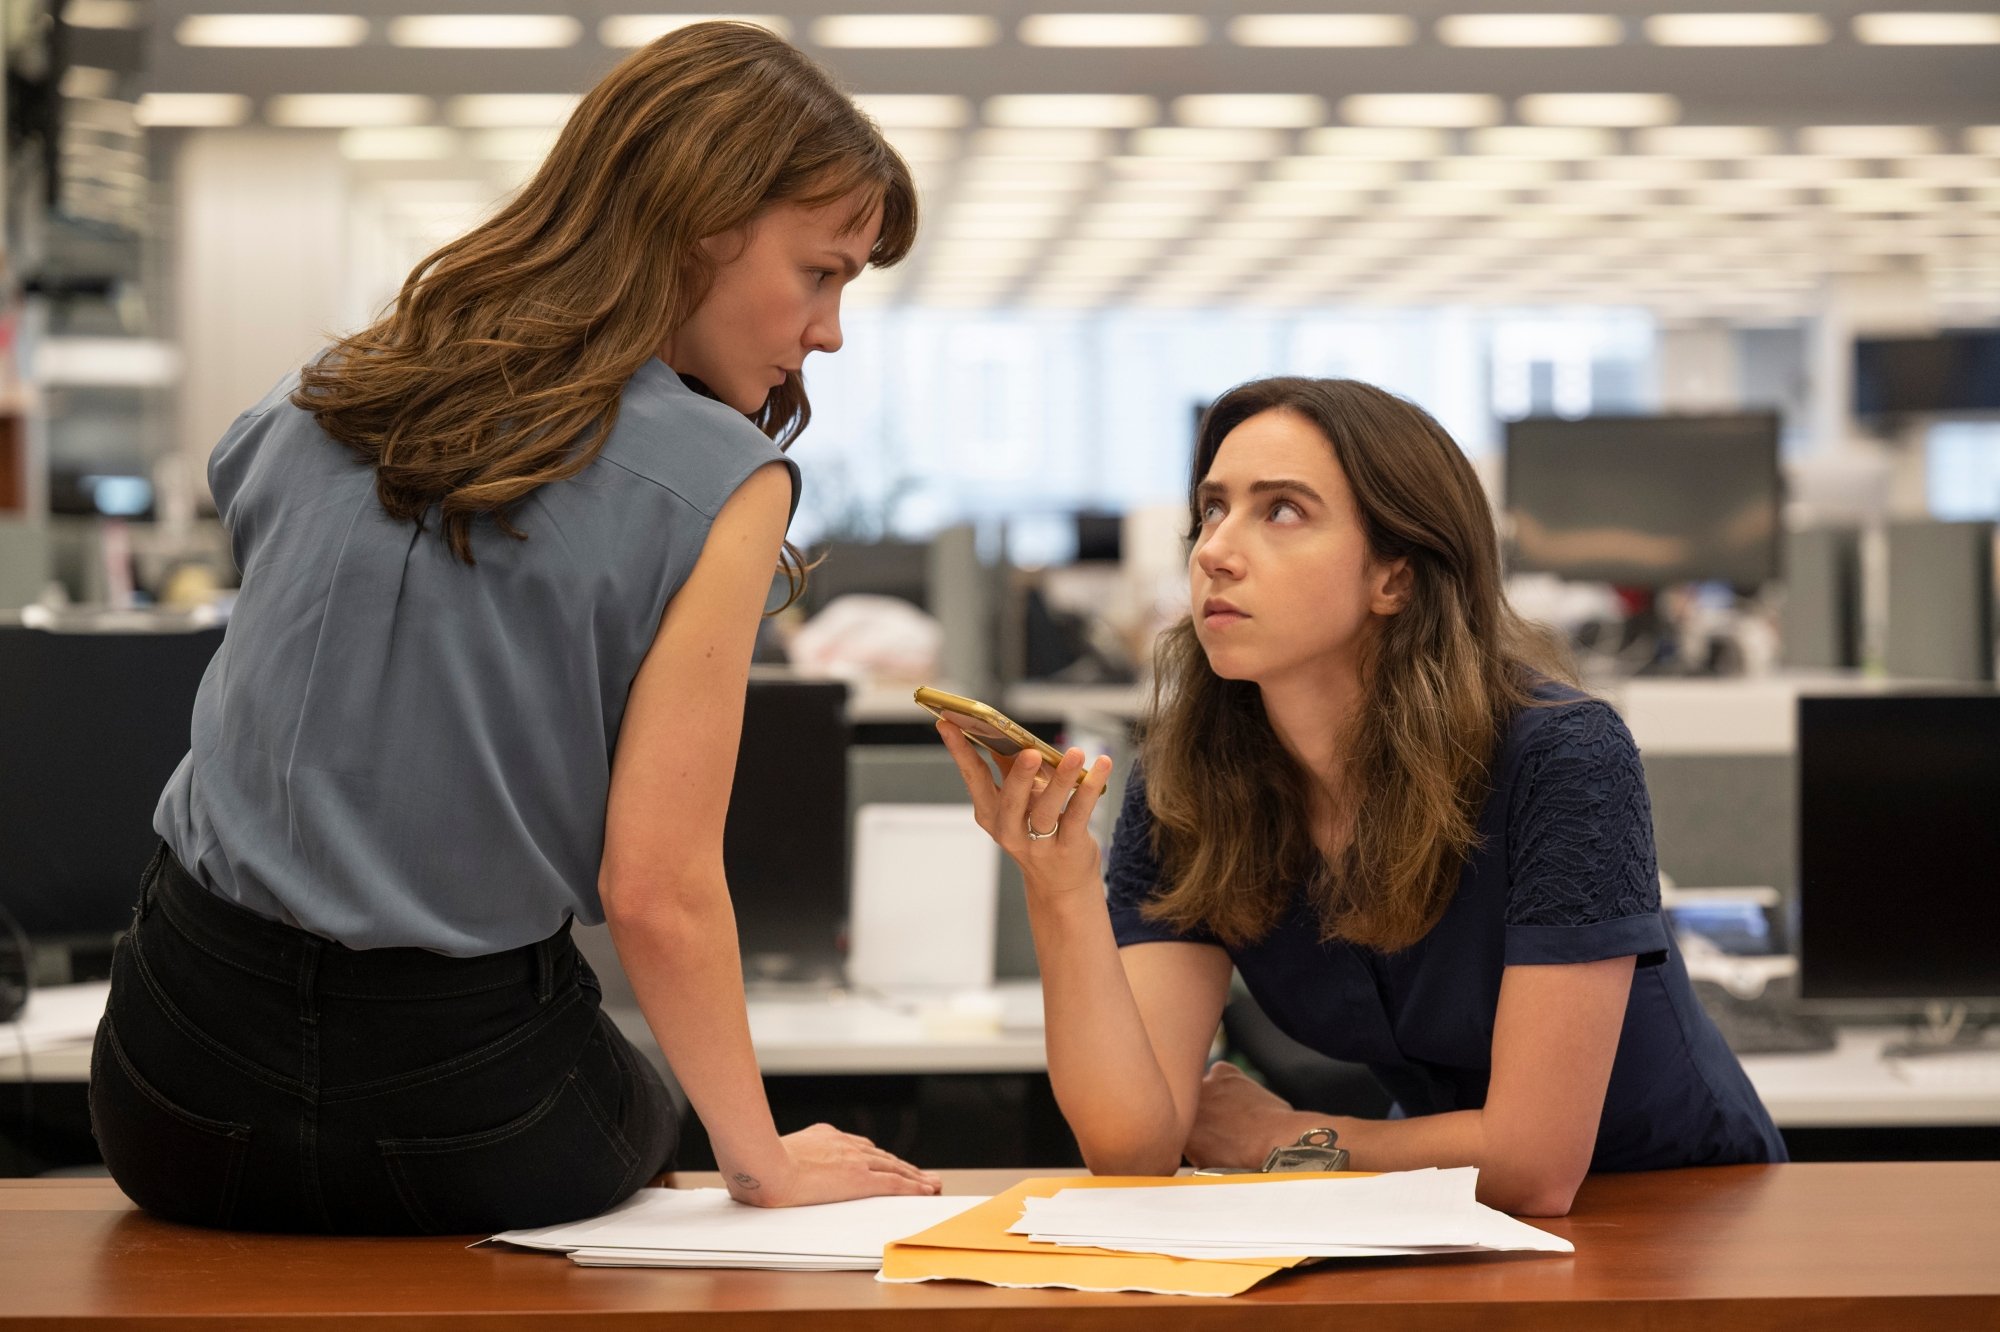 'She Said' Carey Mulligan as Megan Twohey and Zoe Kazan as Jodi Kantor. Kazan is leaning over a desk with paperwork on it. She's holding her phone while looking up at Mulligan, who is sitting on the desk, looking at her.